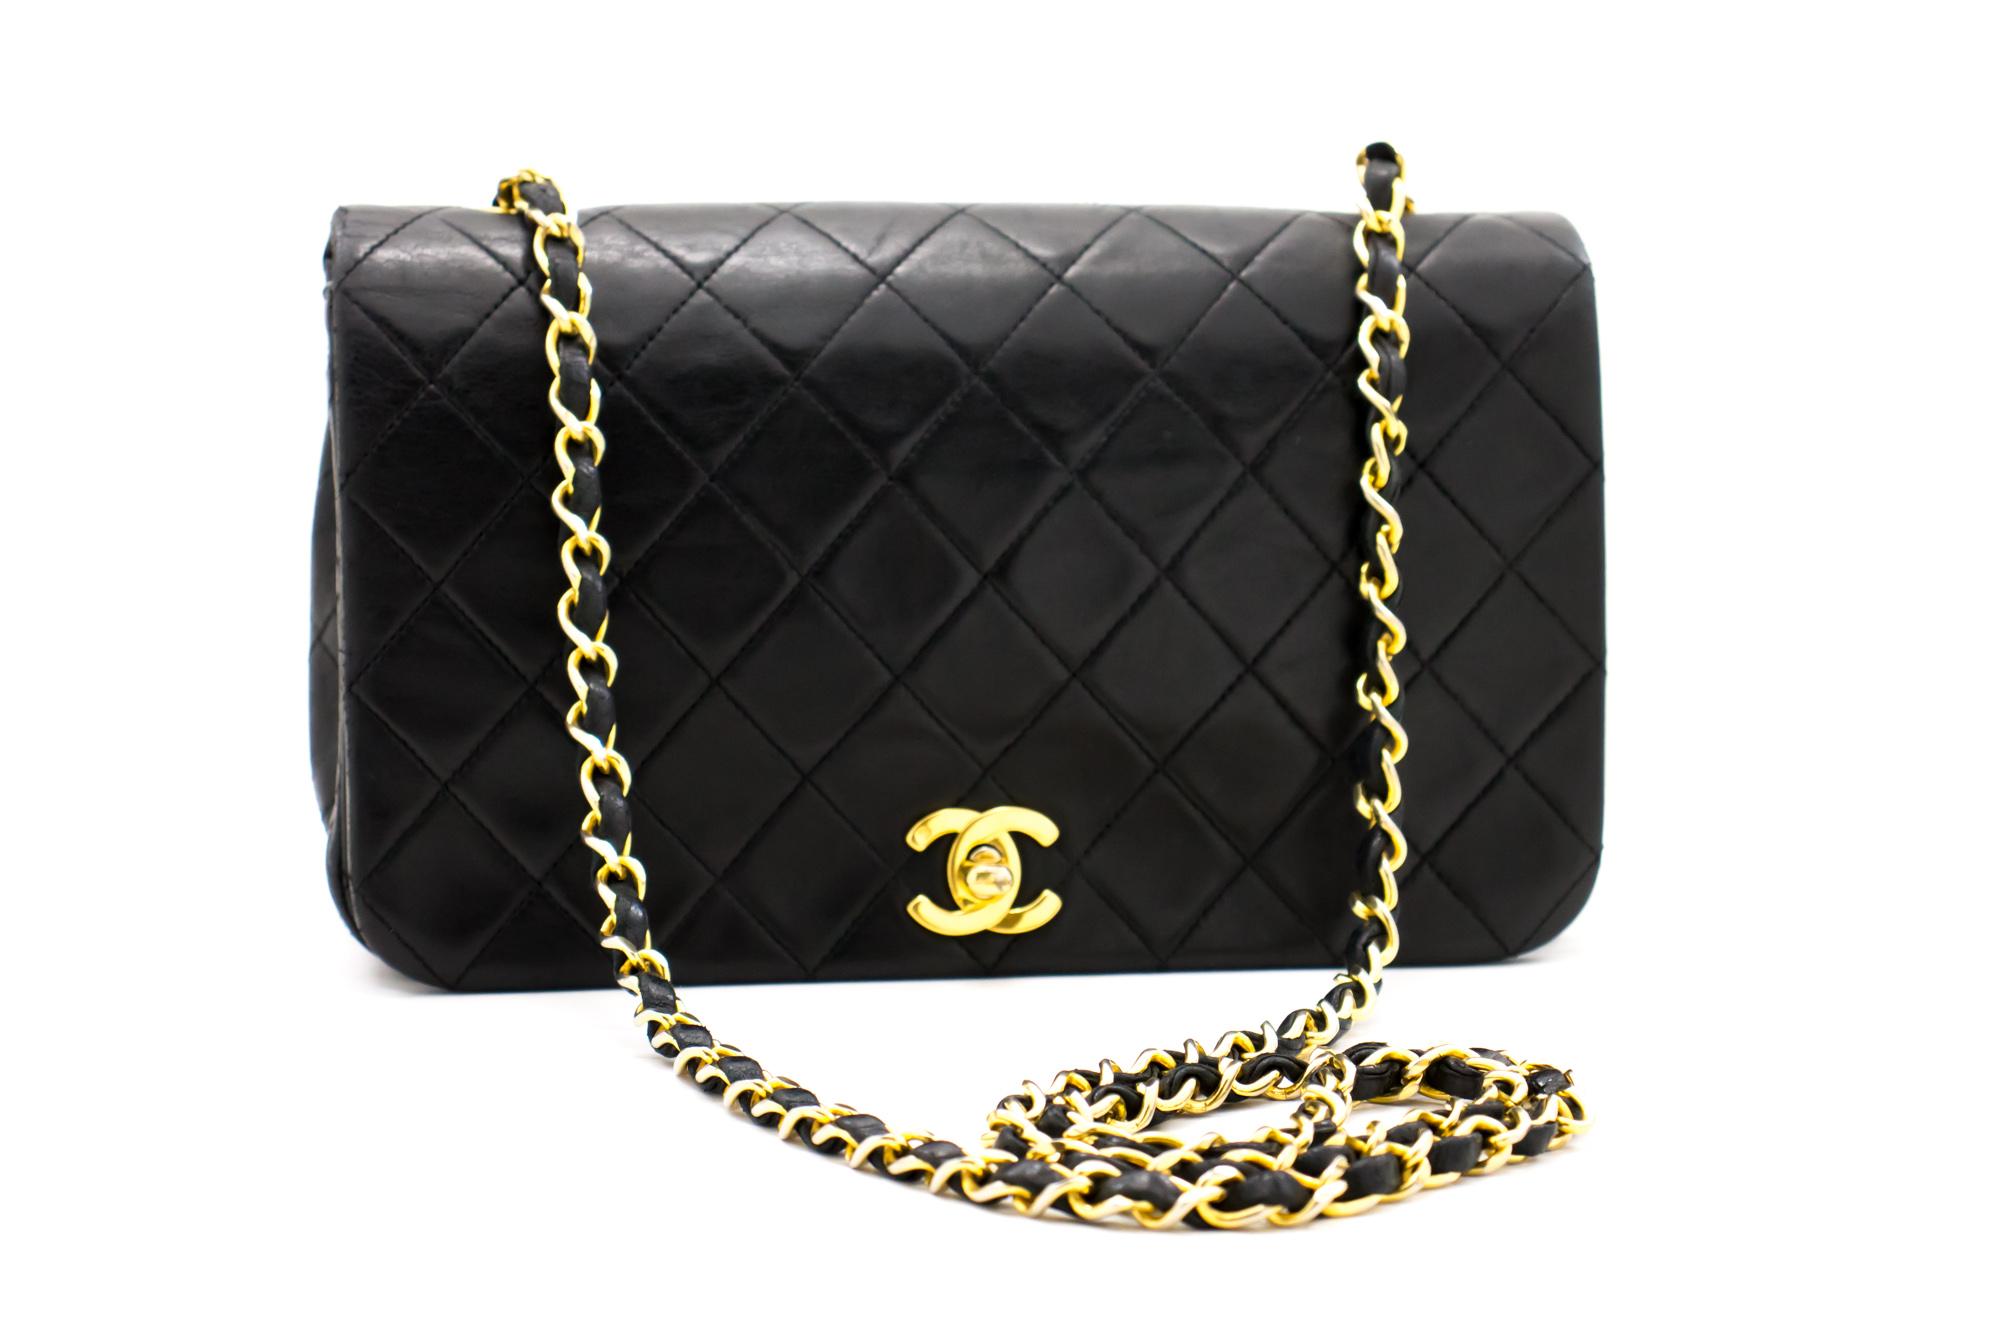 An authentic CHANEL Full Flap Chain Shoulder Bag Crossbody Black Quilted Lamb. The color is Black. The outside material is Leather. The pattern is Solid. This item is Vintage / Classic. The year of manufacture would be 1989-1991.
Conditions &